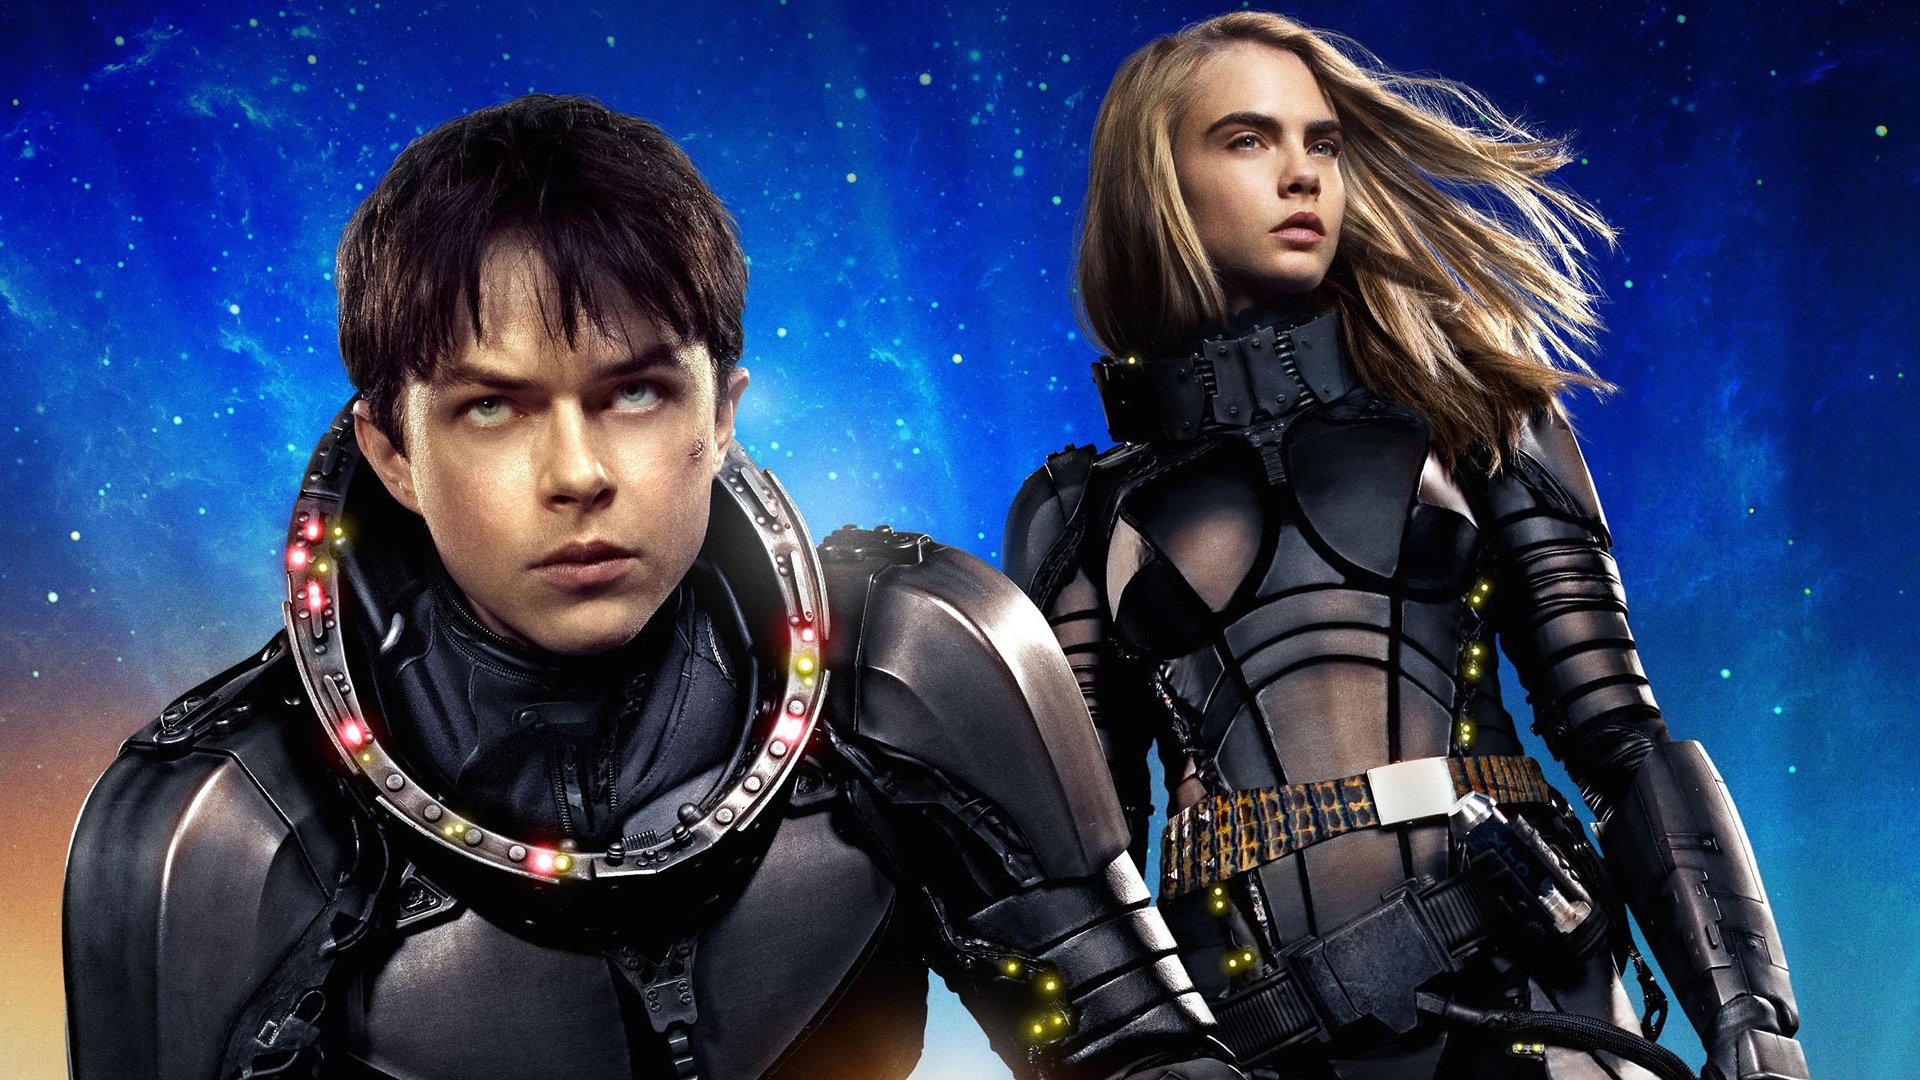 People 1920x1080 movies Cara Delevingne Valerian and the City of a Thousand Planets women men